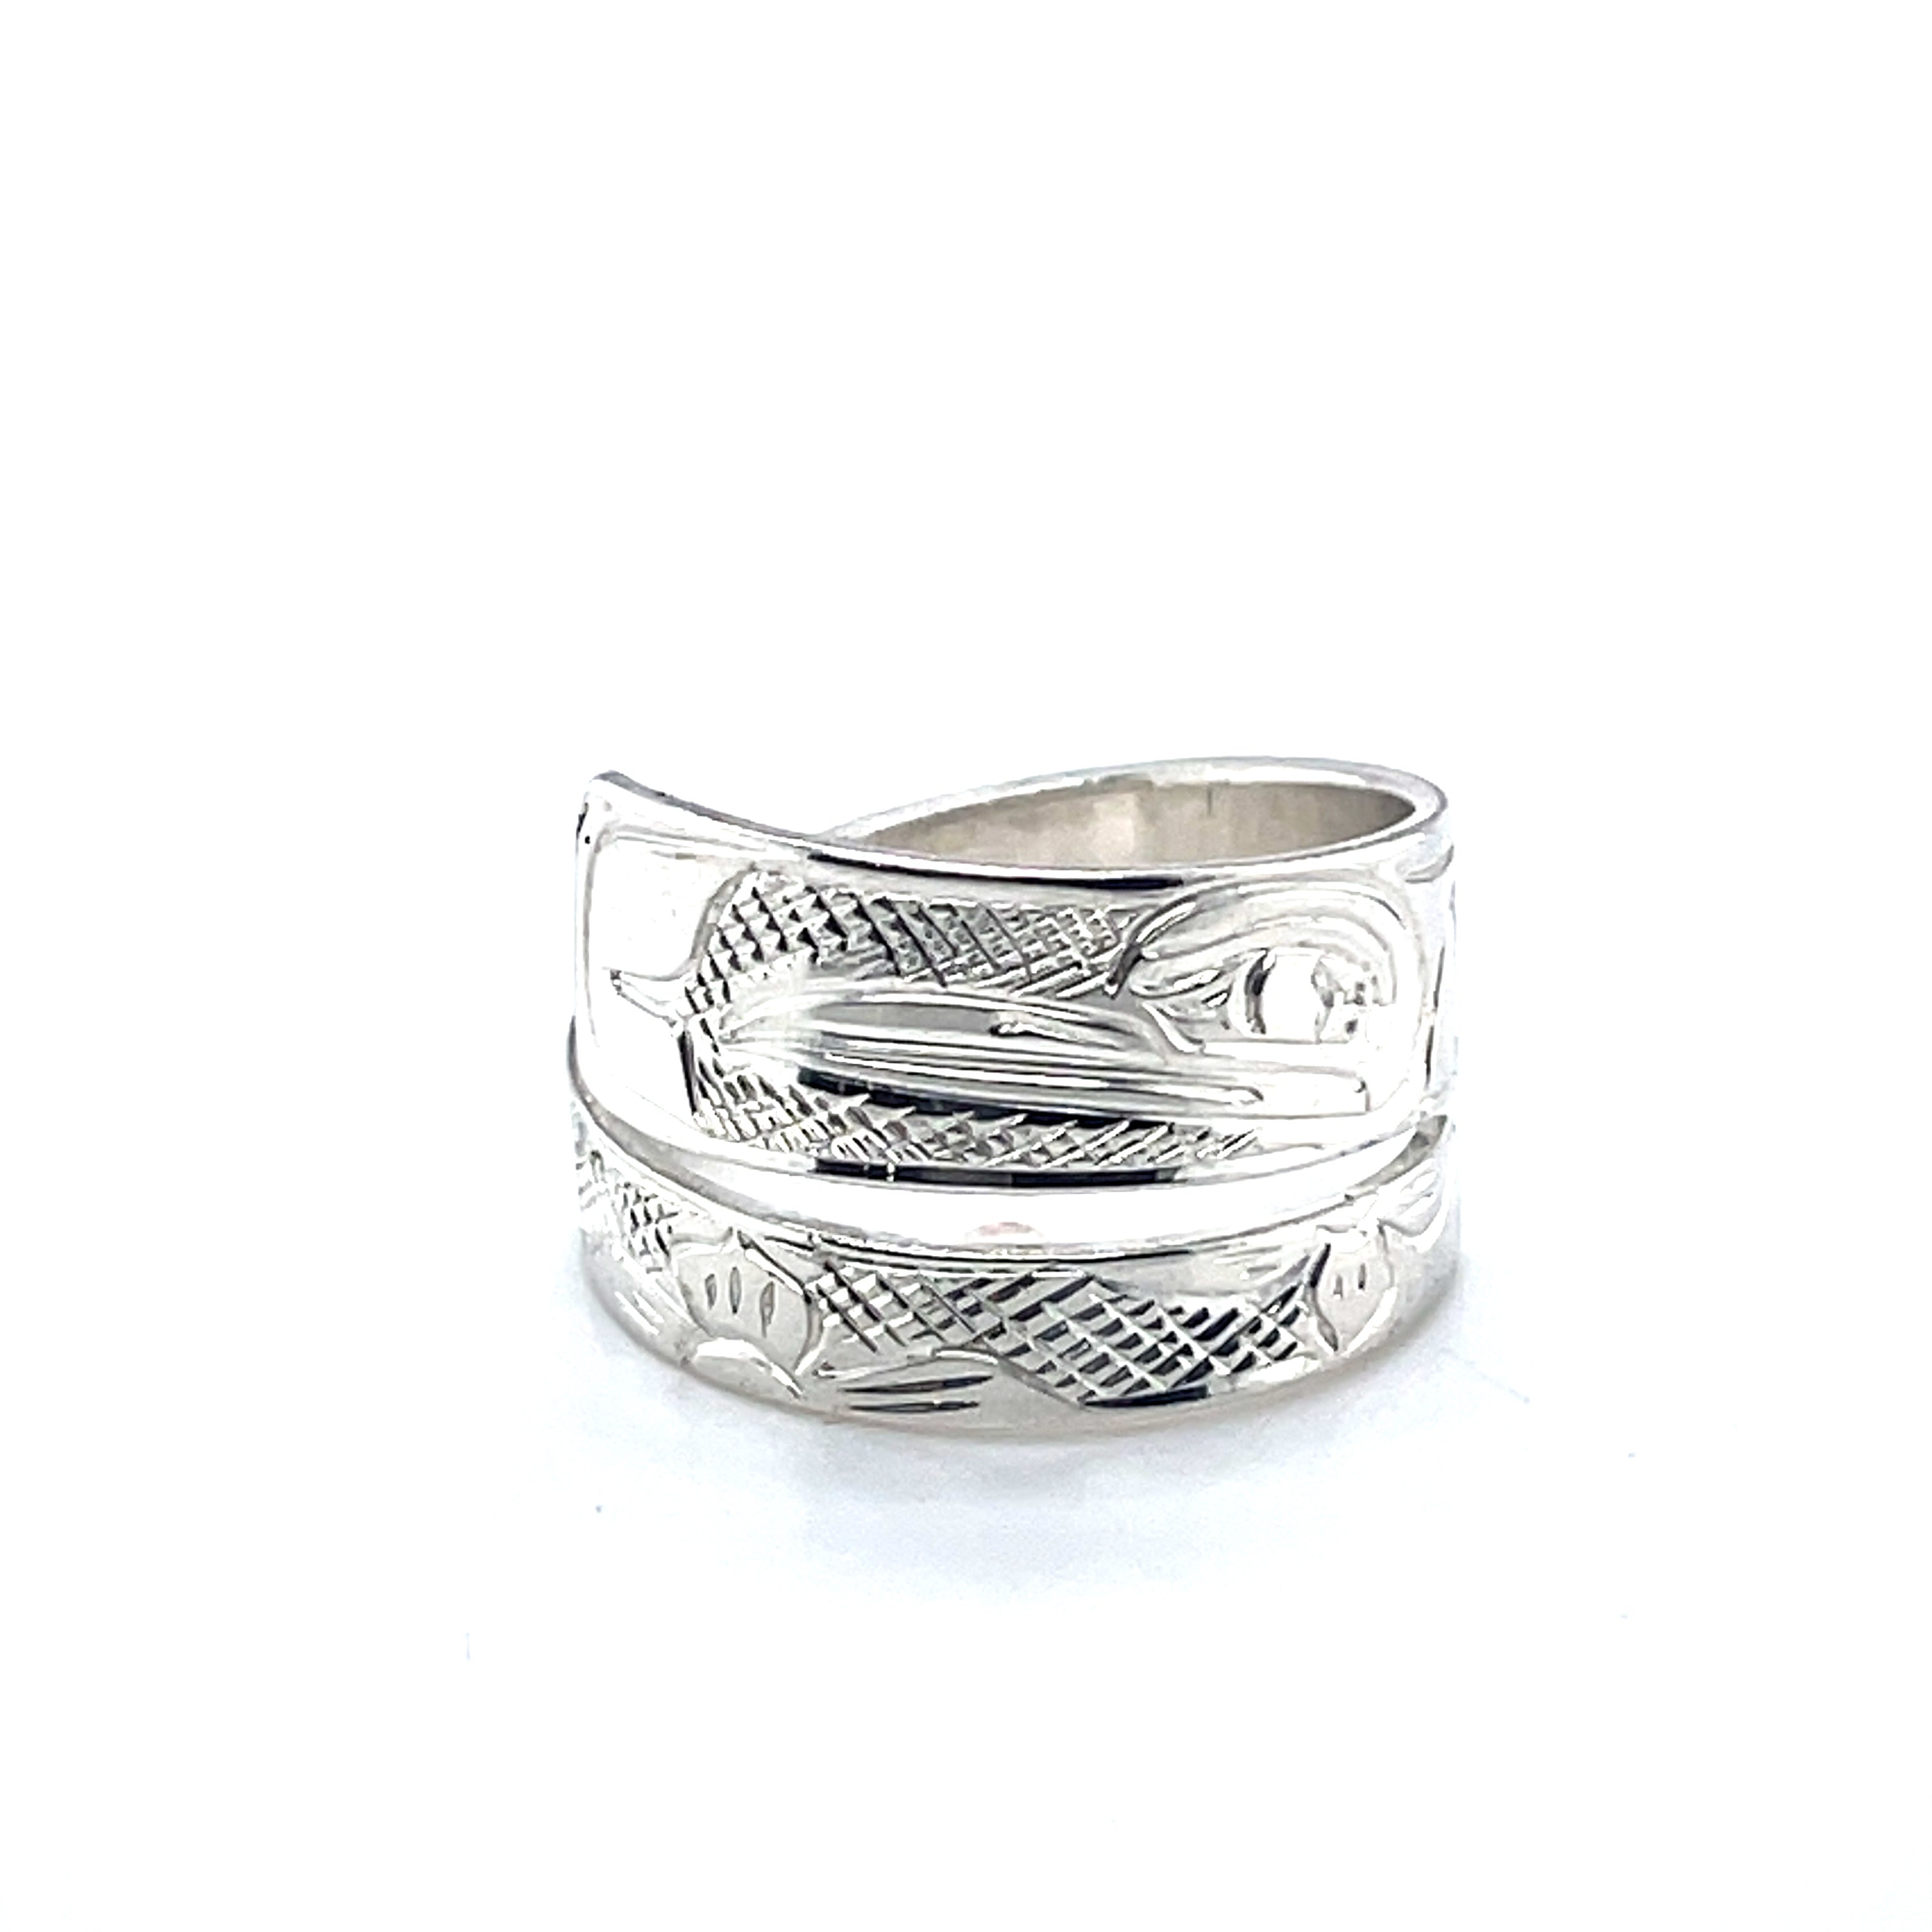 Ring - Sterling Silver - Wrap - Hummingbird - Size 8.5